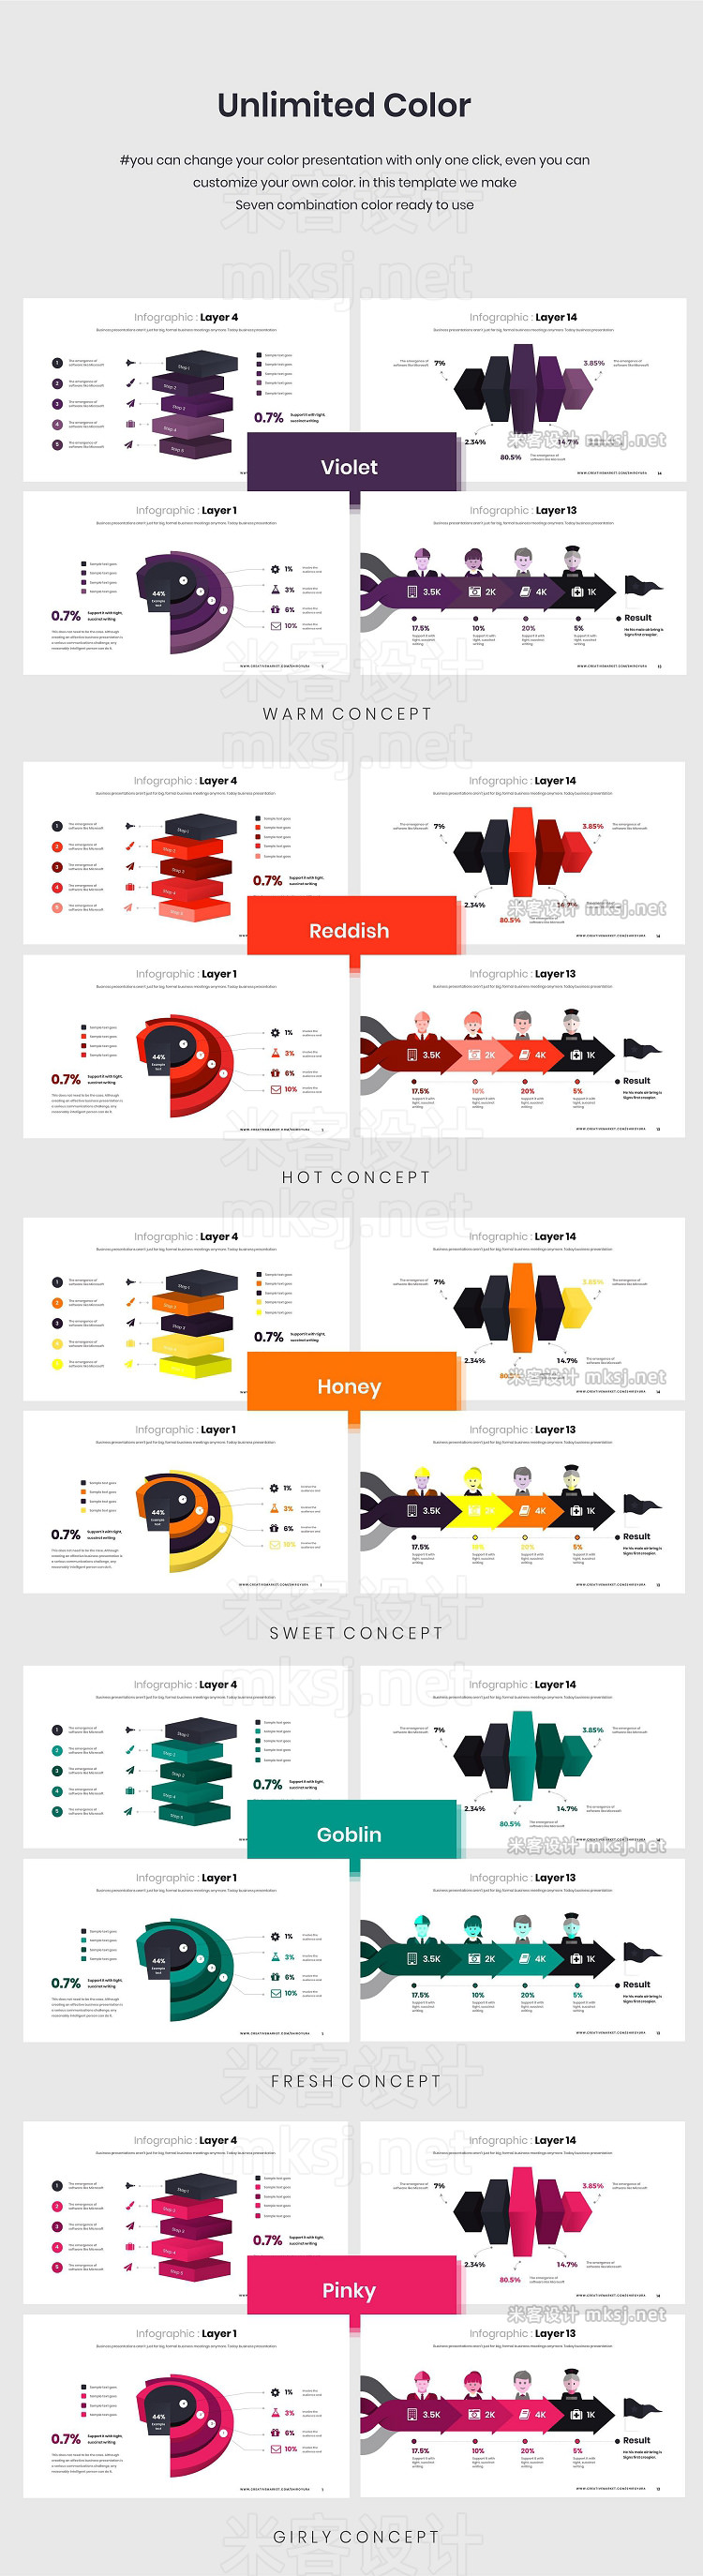 PPT模板 Layer Infographic PowerPoint